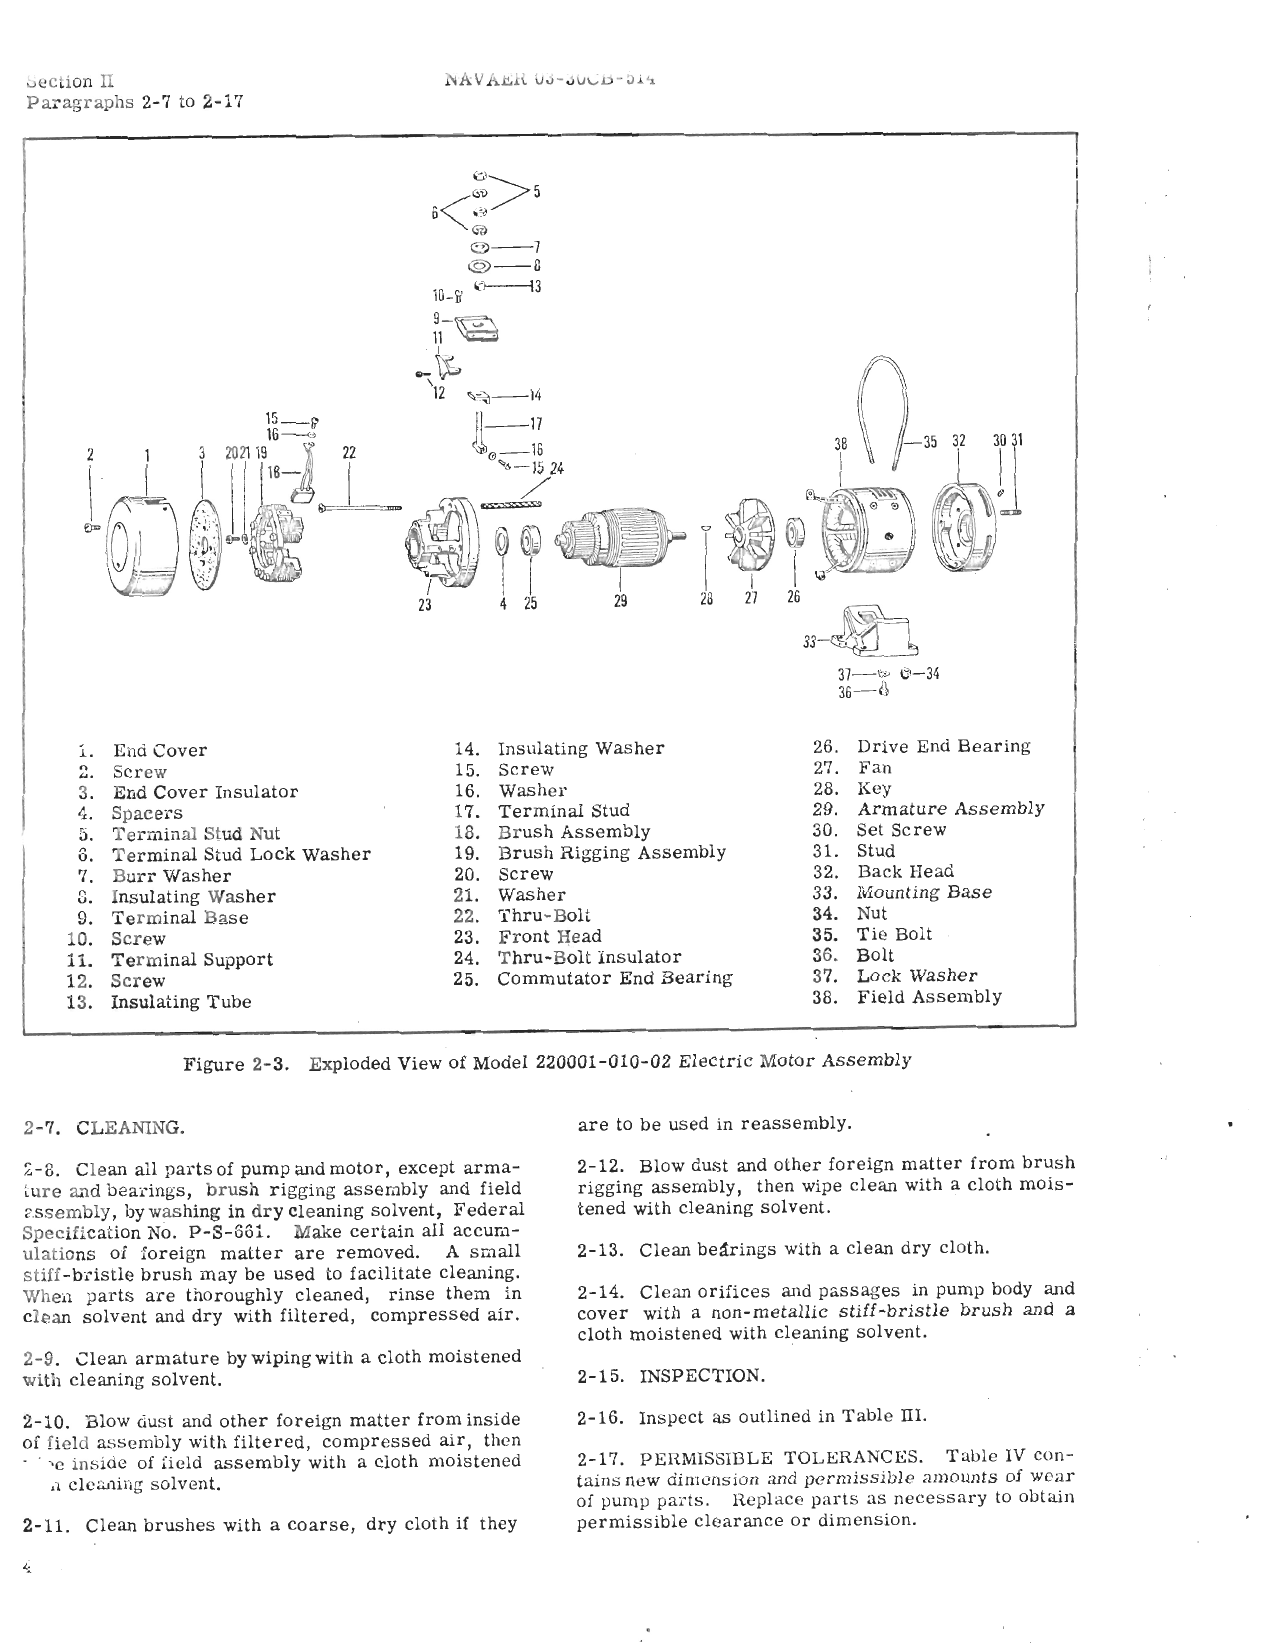 Sample page 7 from AirCorps Library document: Overhaul Instructions for Electric Motor Driven Hydraulic Gear Type Pump - Model 1E-777 Series